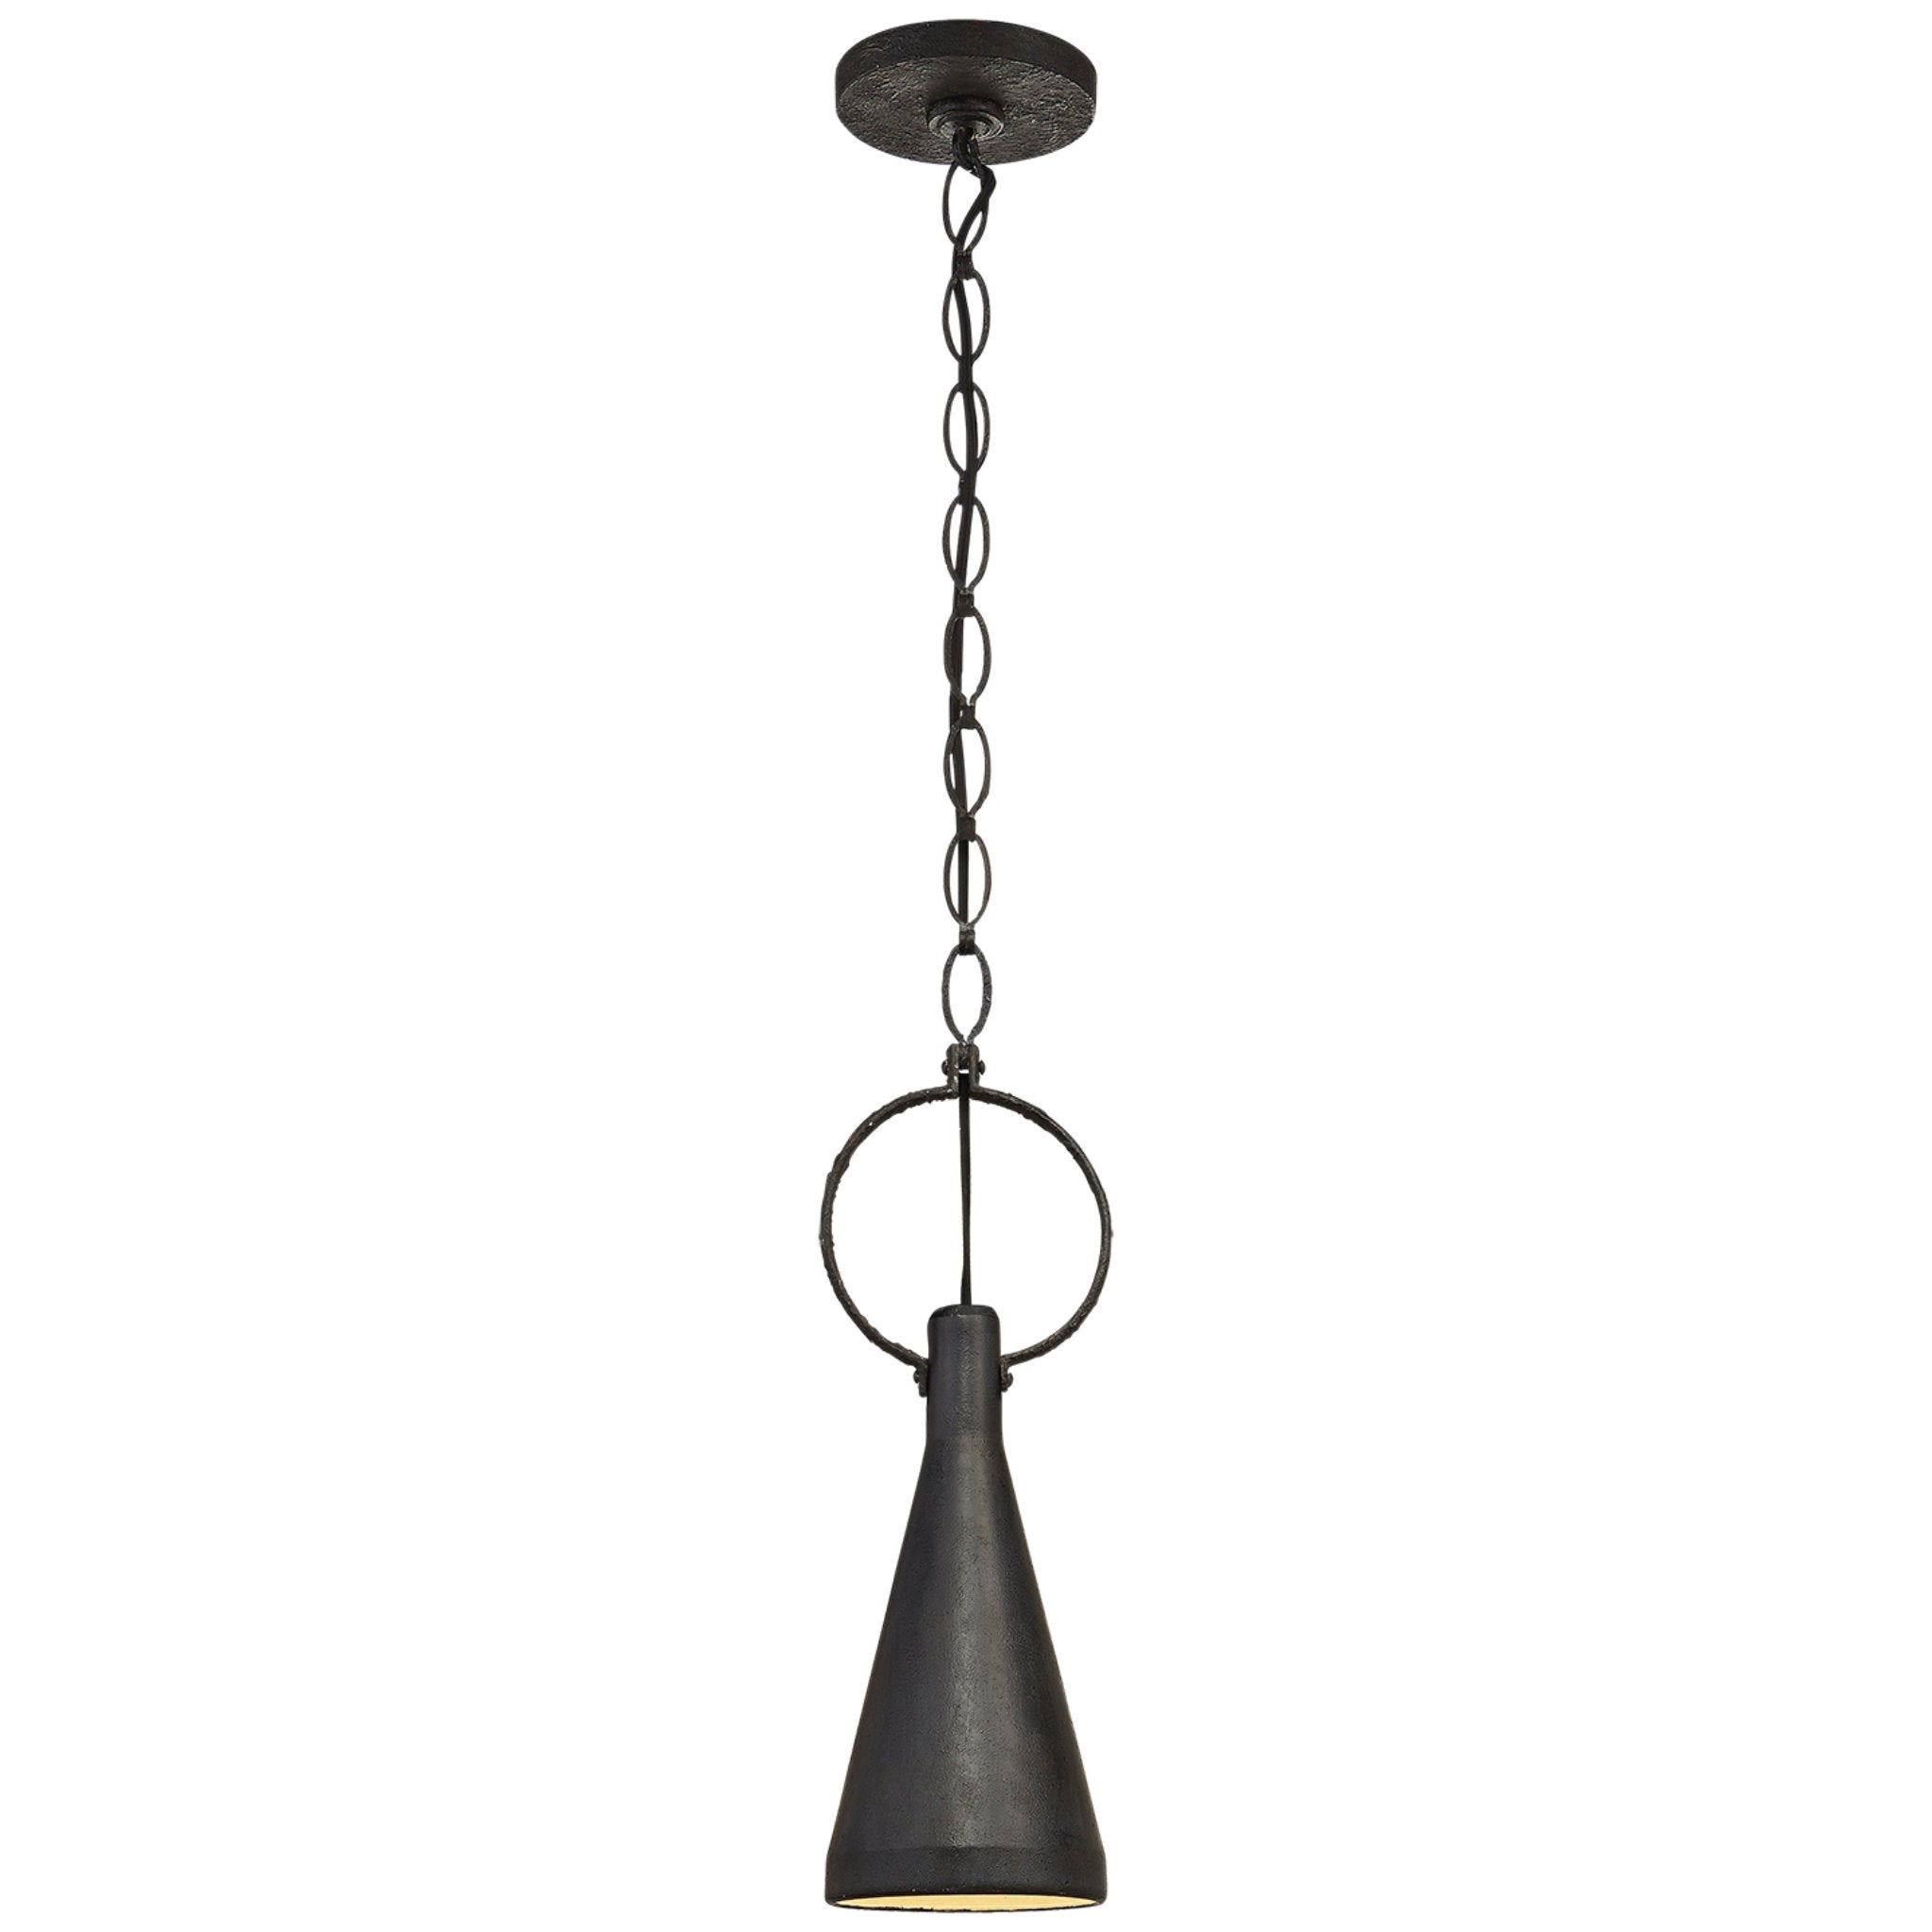 Suzanne Kasler Limoges Small Pendant in Natural Rust with Aged Iron Shade